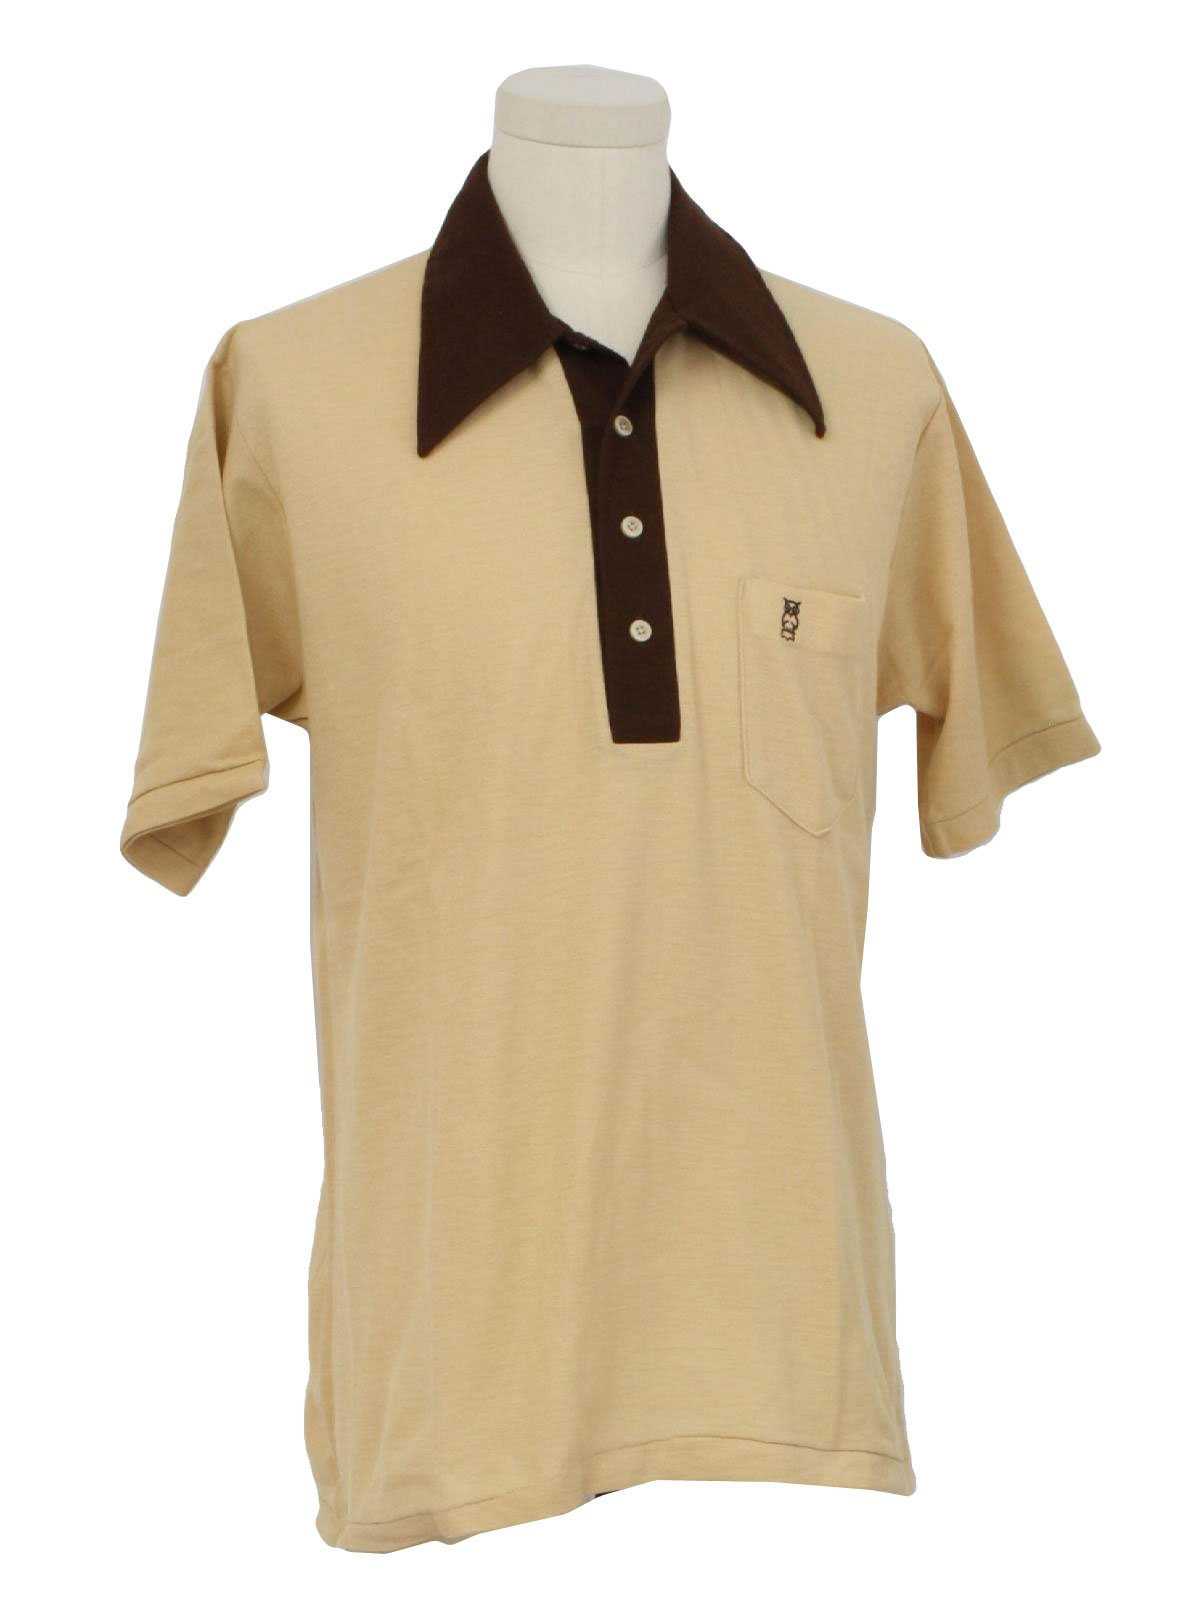 Retro Seventies Shirt: 70s -Care Label Only- Mens tan, pullover ...